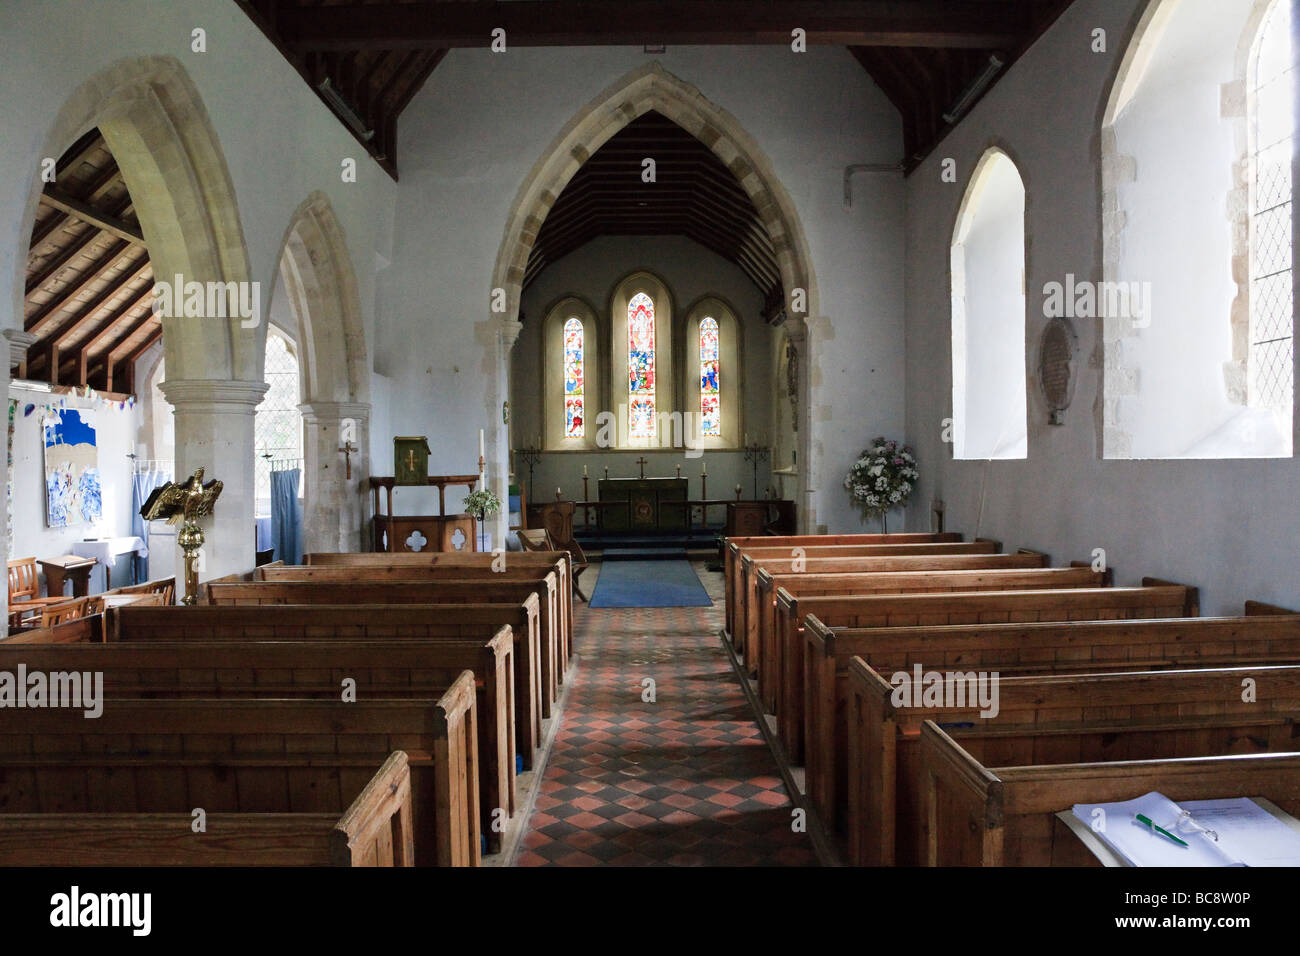 The Interior of St Mary s Church Chidham West Sussex UK Stock Photo